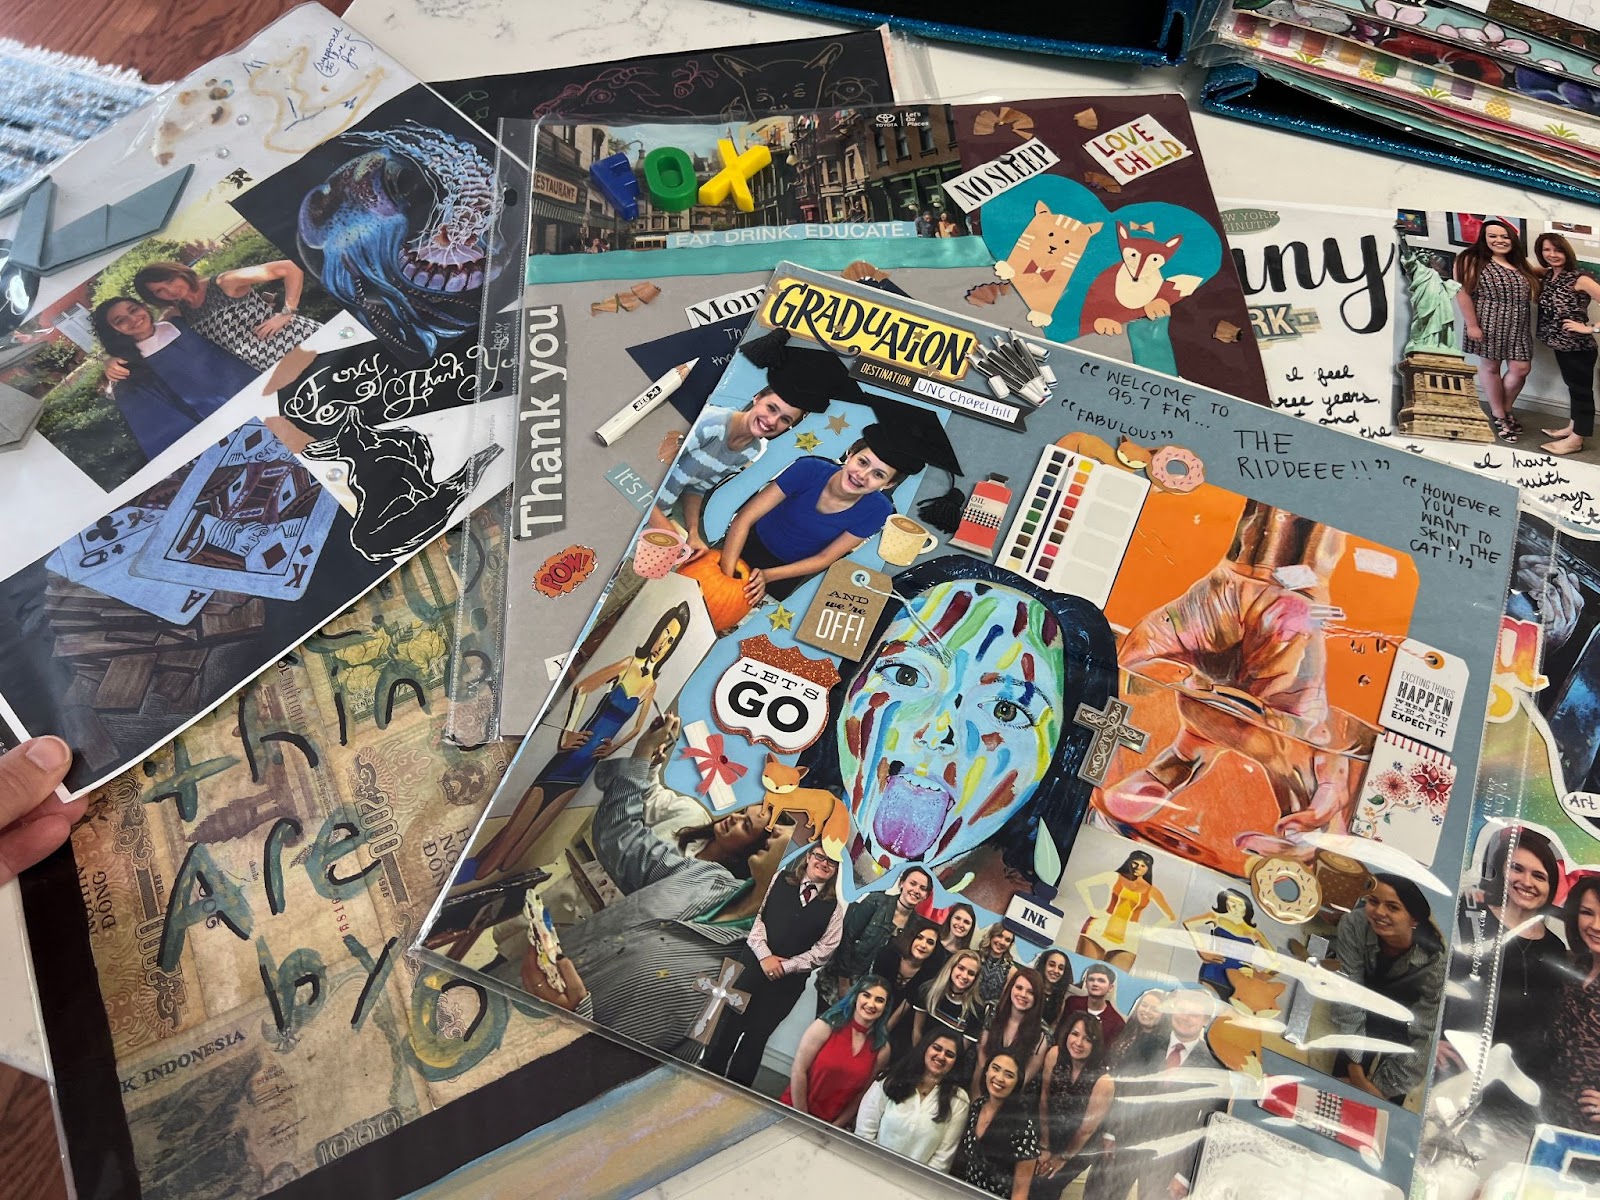 Scrapbook pages from Tiffany Fox's AP Art and Design Class. This is a collaborative class project where students each create a scrapbook page that reflects their year spent in AP Art. This is a mixed media art project designed by Tiffany Fox of MrsTFox Resources Art Curriculum